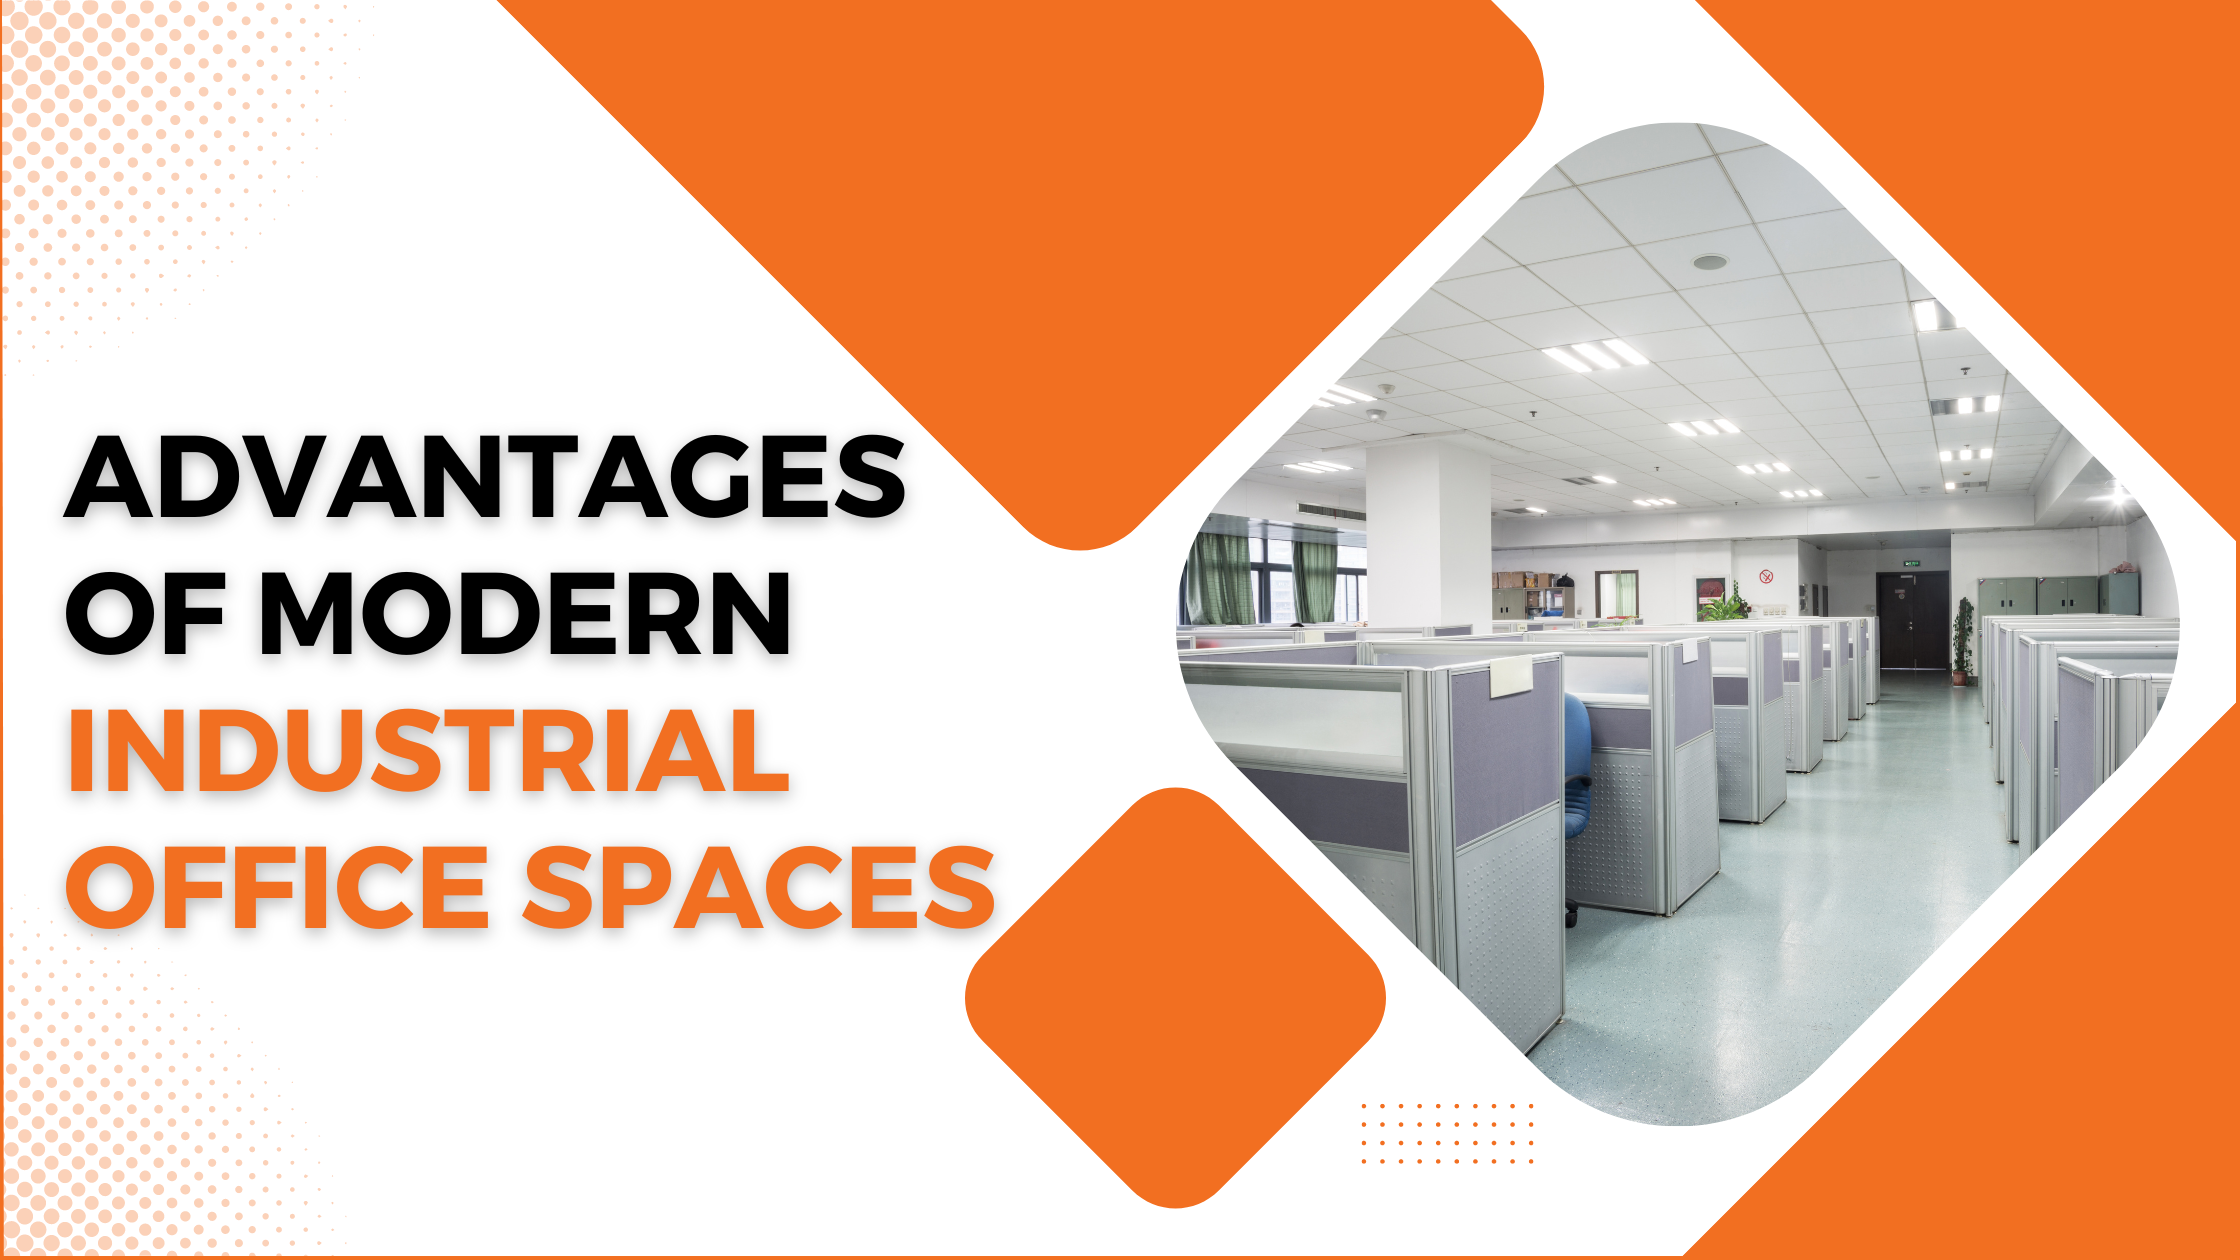 Advantages of Modern Industrial Office Spaces